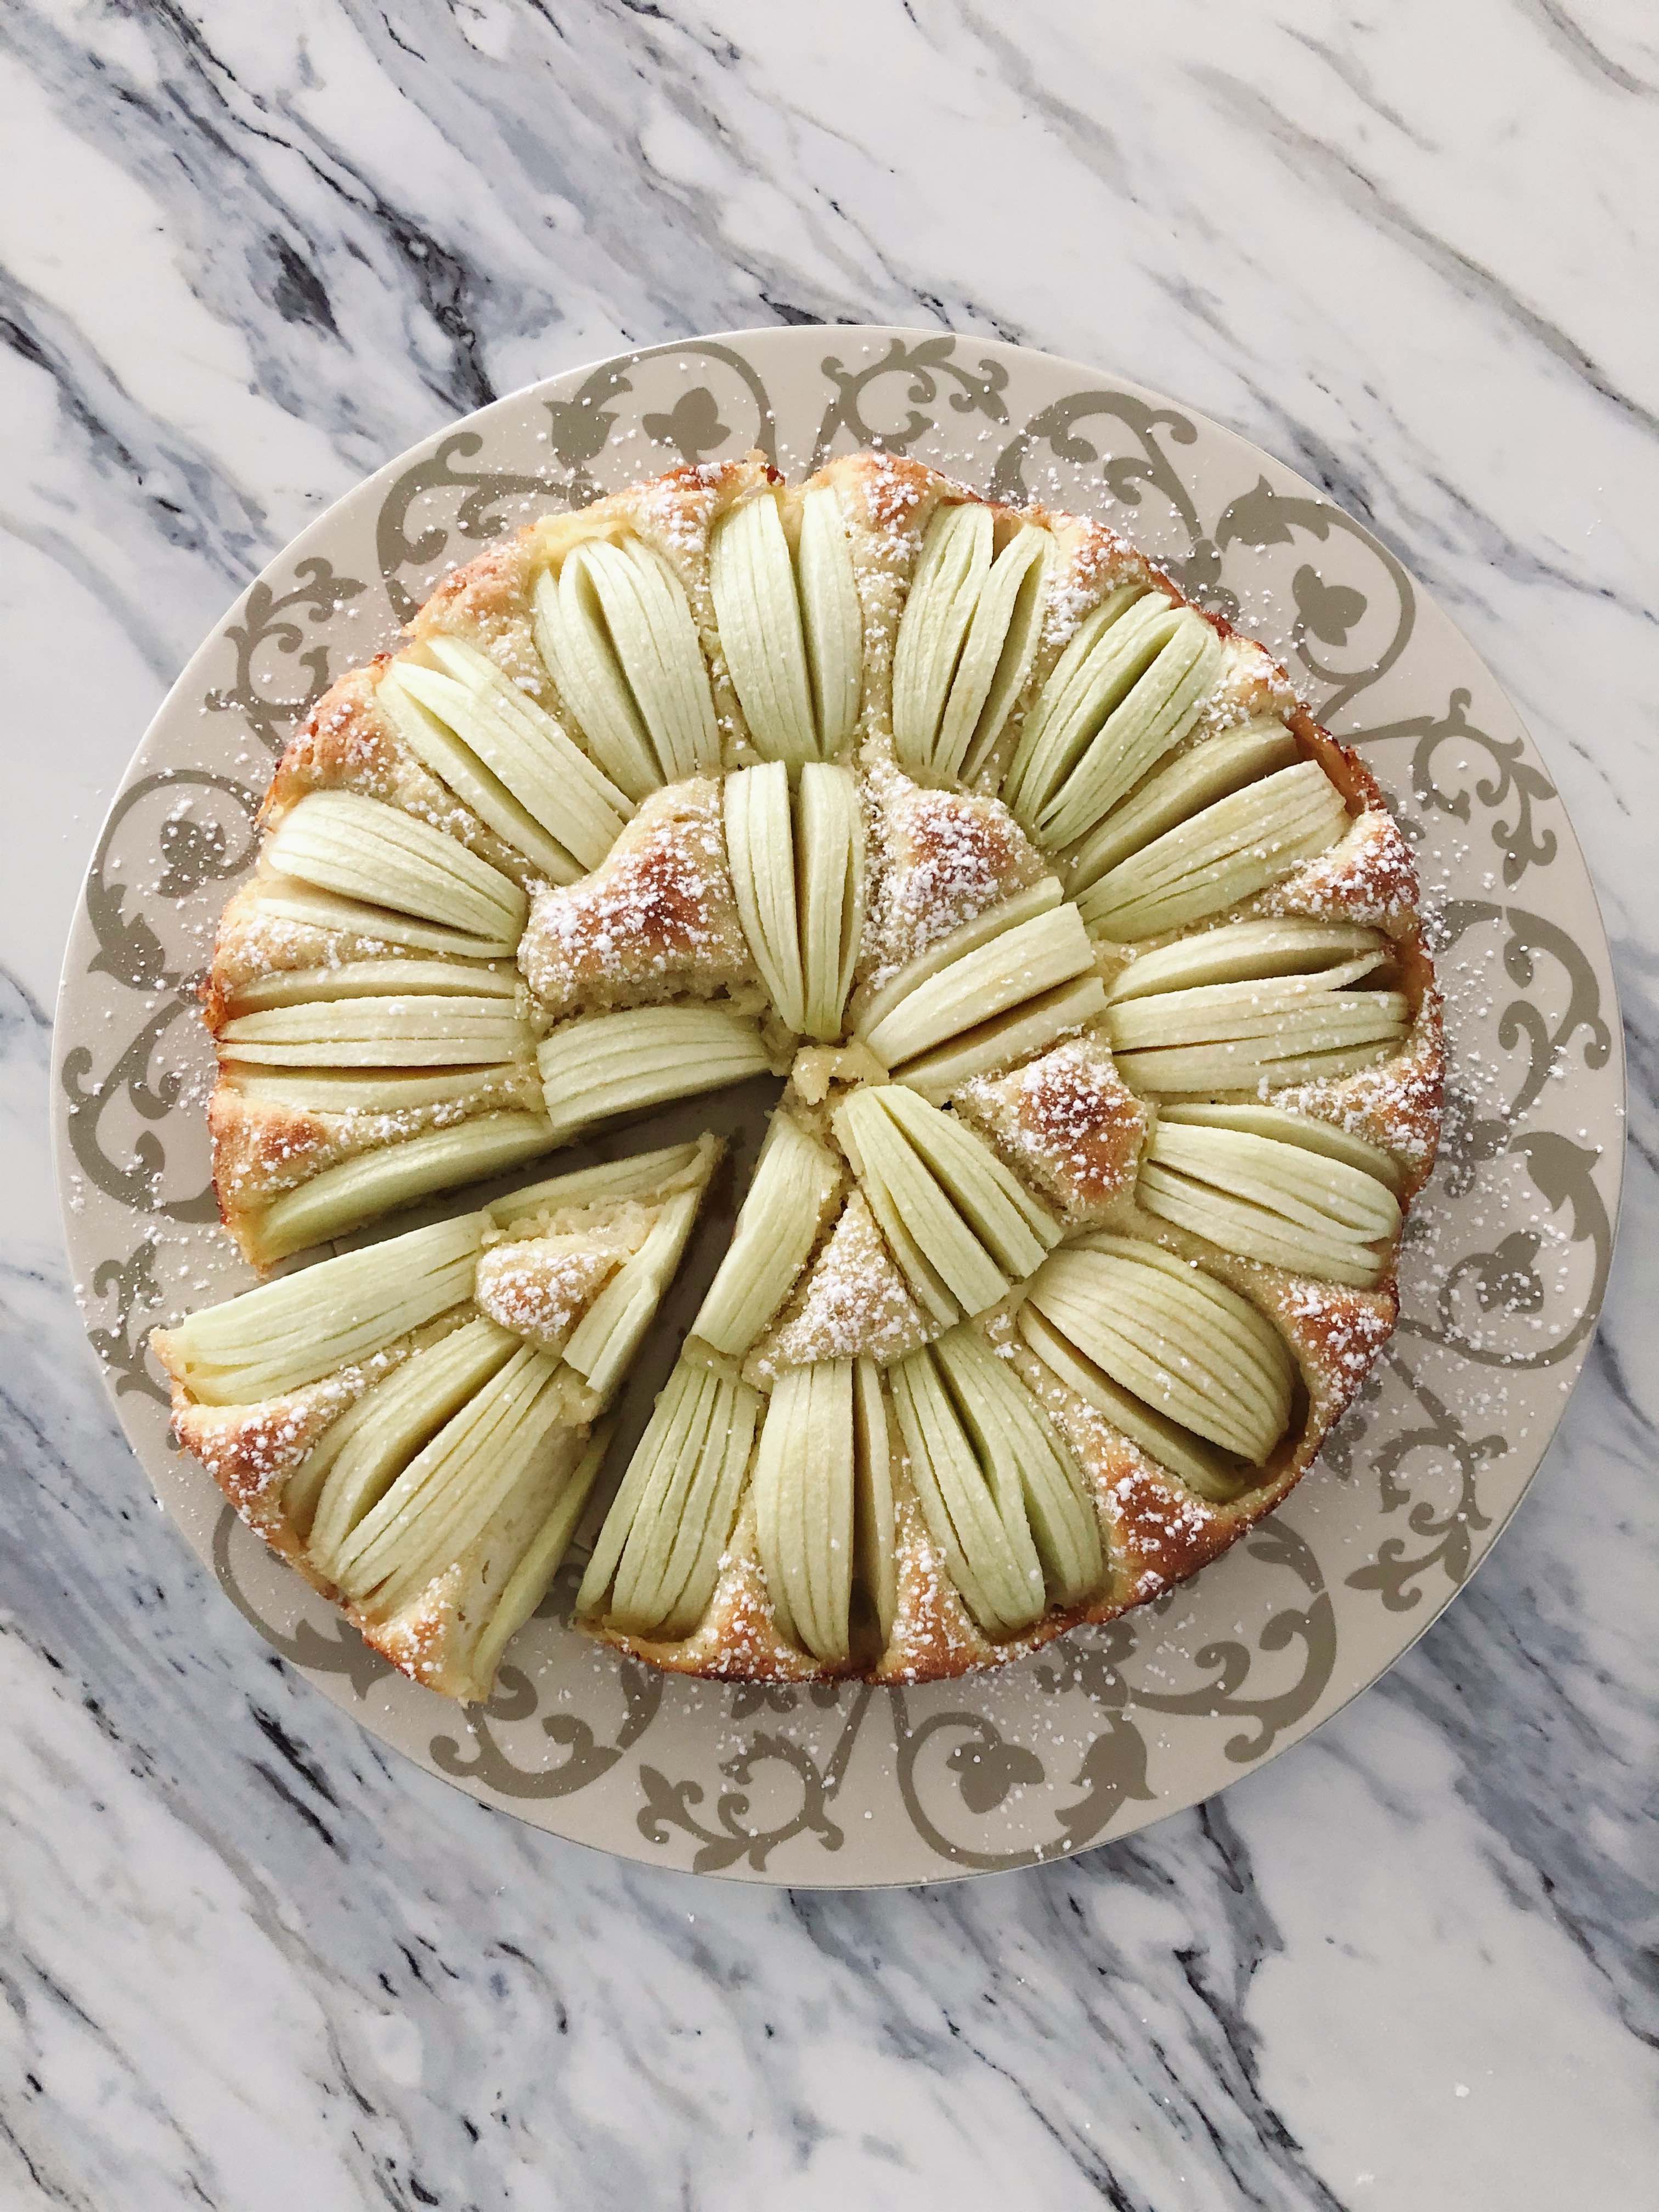 An apple sponge cake made with spelt flour on a decorative plate with one slice cut